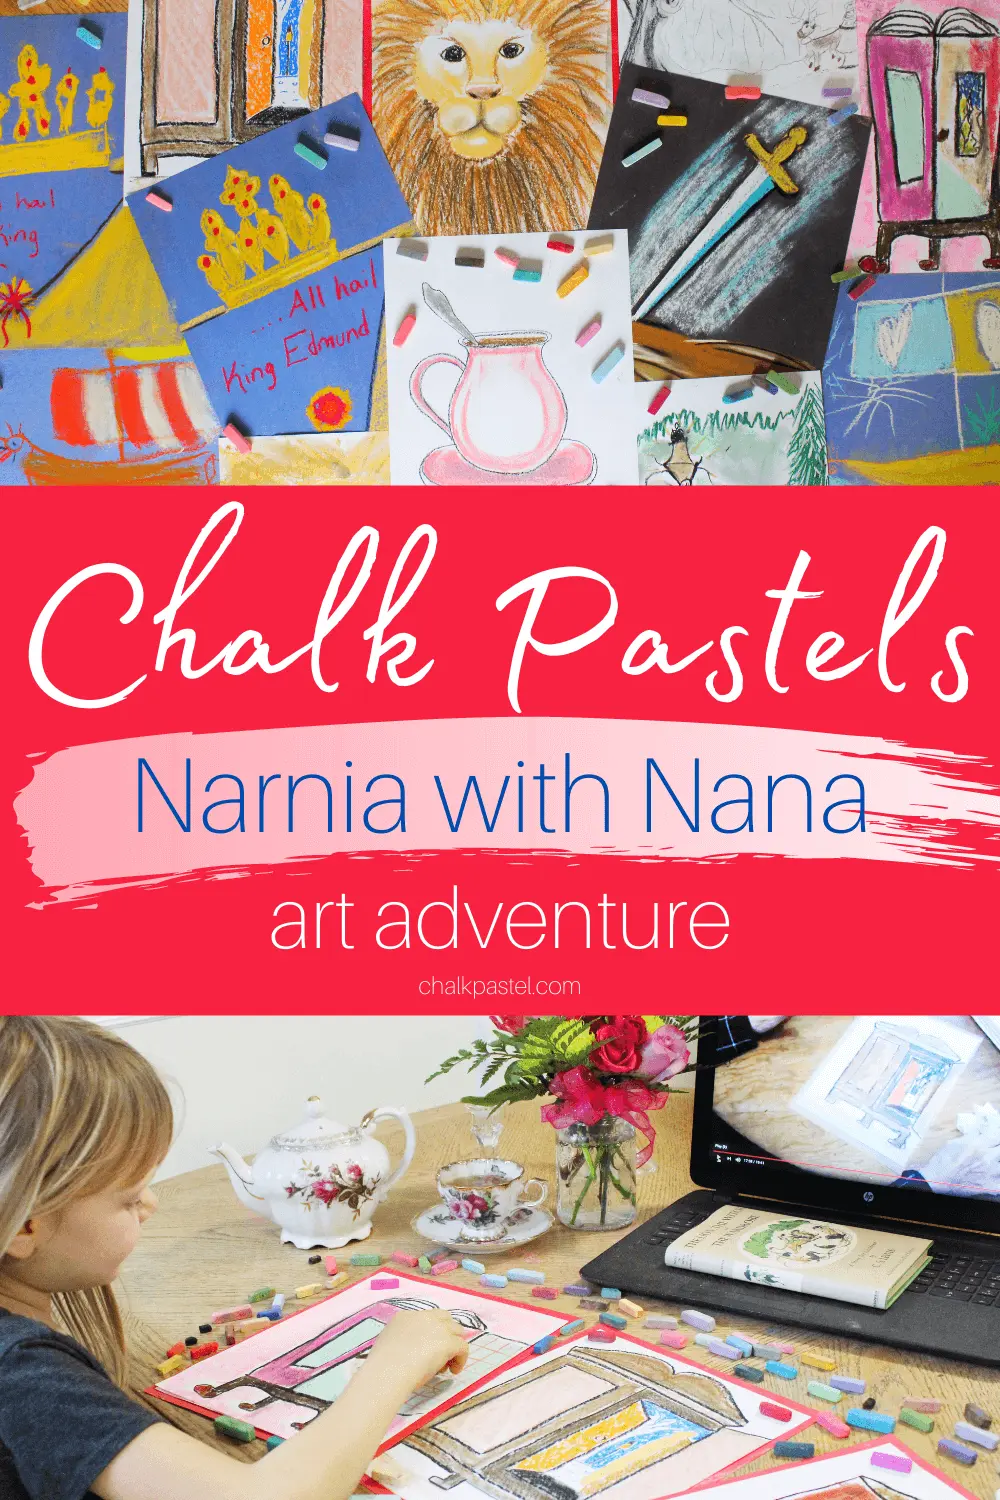 Chalk Pastels Narnia with Nana Art Adventure: Are your kid's ready for an epic art journey? Then, take a trip with chalk pastels Narnia with Nana art adventure! #NarniawithNana #Narnia #Narniaart #Narniachalppastels